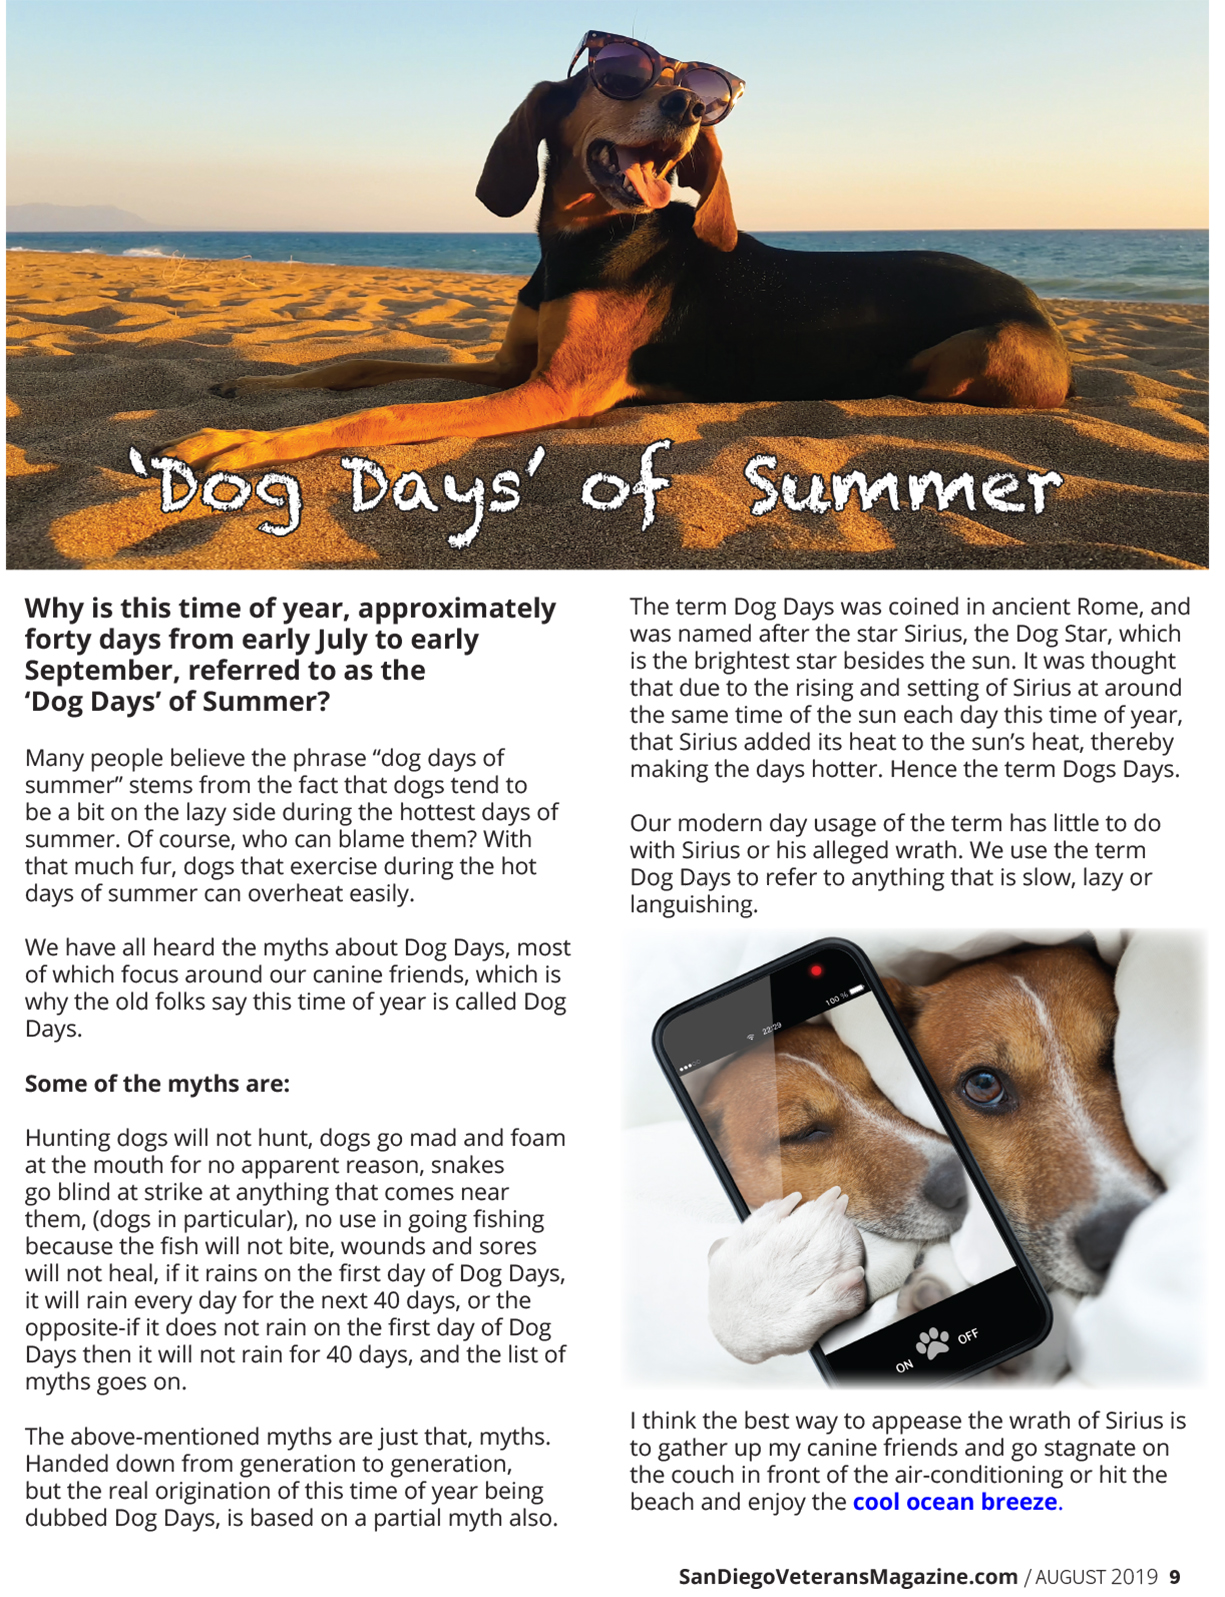 Dog Days of Summer Tribute to Service Dogs San Diego Veterans Magazine